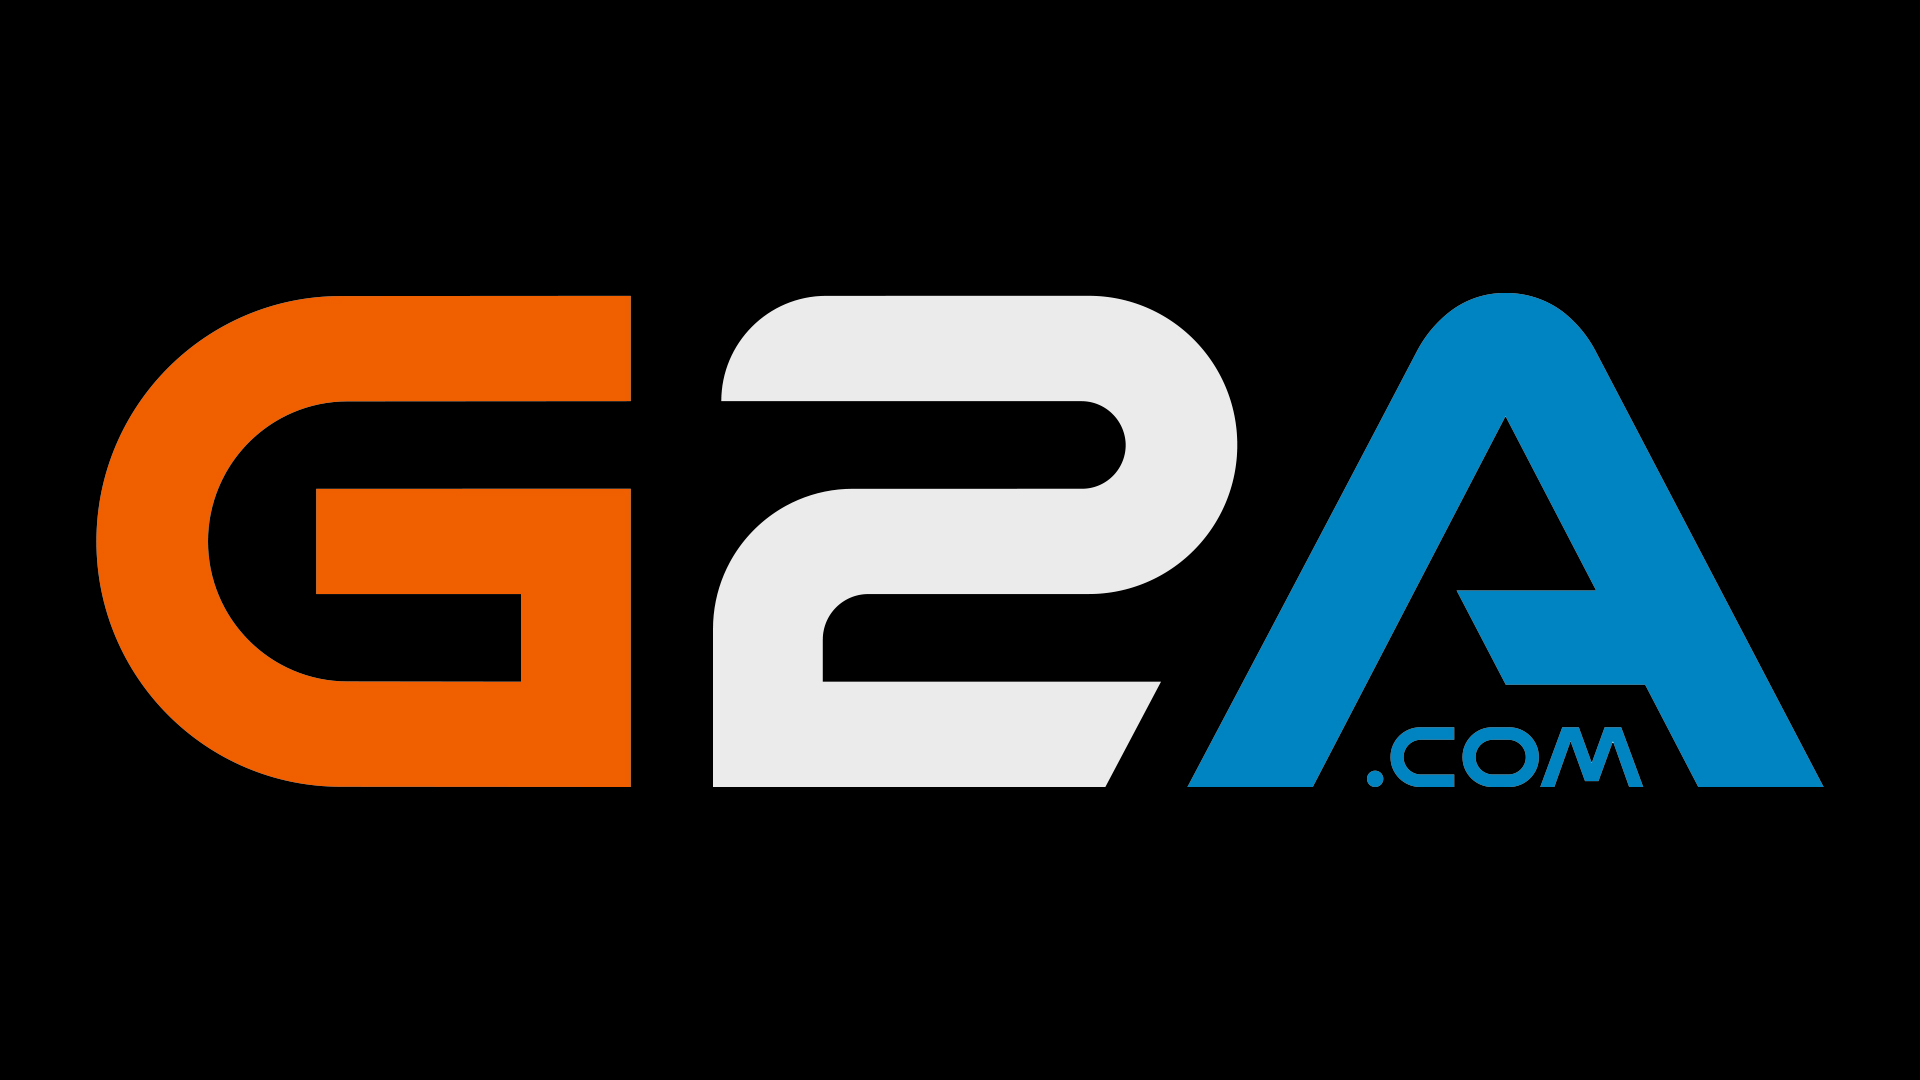 Is G2A a legit and safe site for game codes? Answered